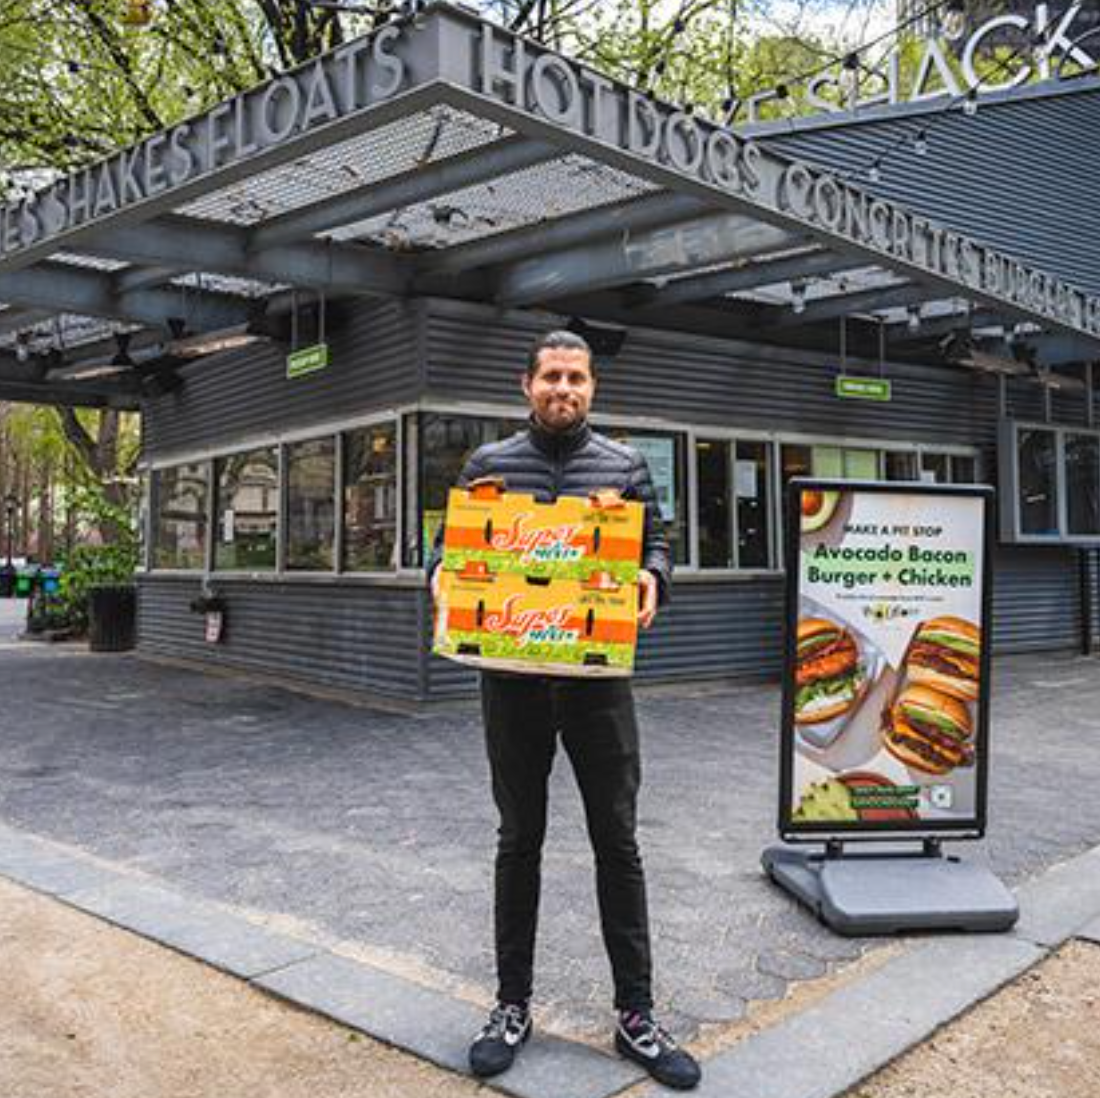 Davocadoguy standing with perfectly ripened avocados in front of Shake Shack's NYC Flagship location in Madison Square Park. Kicking off a limited time special collaboration to launch Shake Shack's new Avocado Burger in 2021